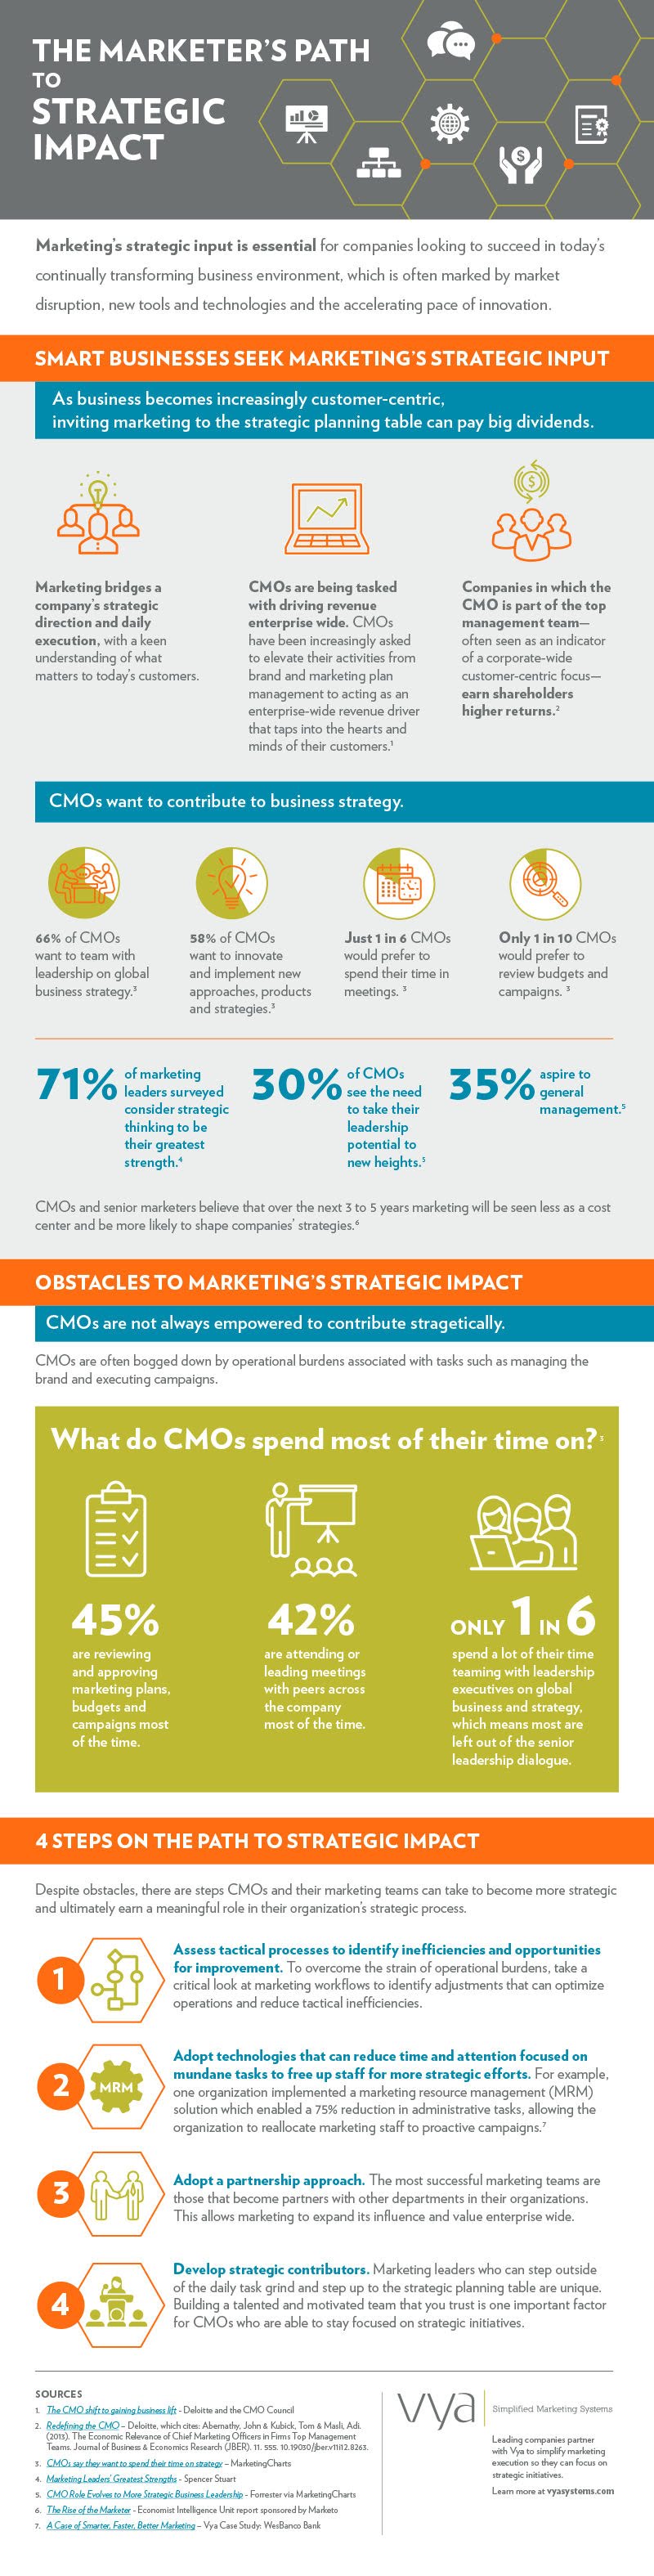 How Marketers Can Be Strategic Influencers, and Why Their Input Is Key for Companies [Infographic]